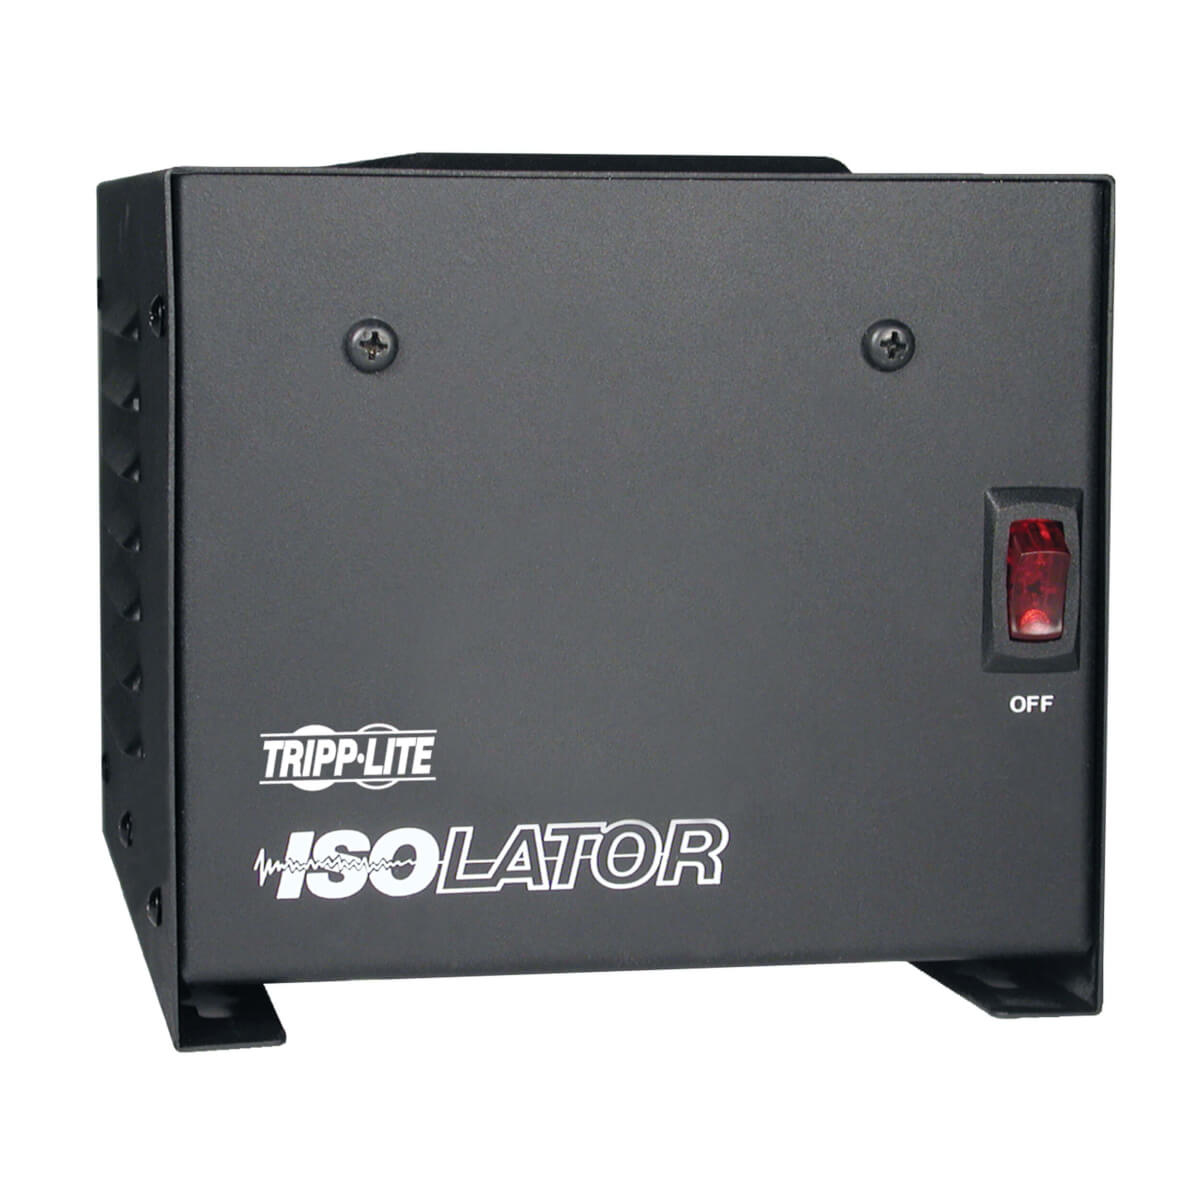 Tripp Lite 500W Isolation Transformer with Surge 120V 4 Outlet 6ft Cord TAA GSA - Line conditioner - AC 120 V - 500 Watt - output connectors: 4 - United States